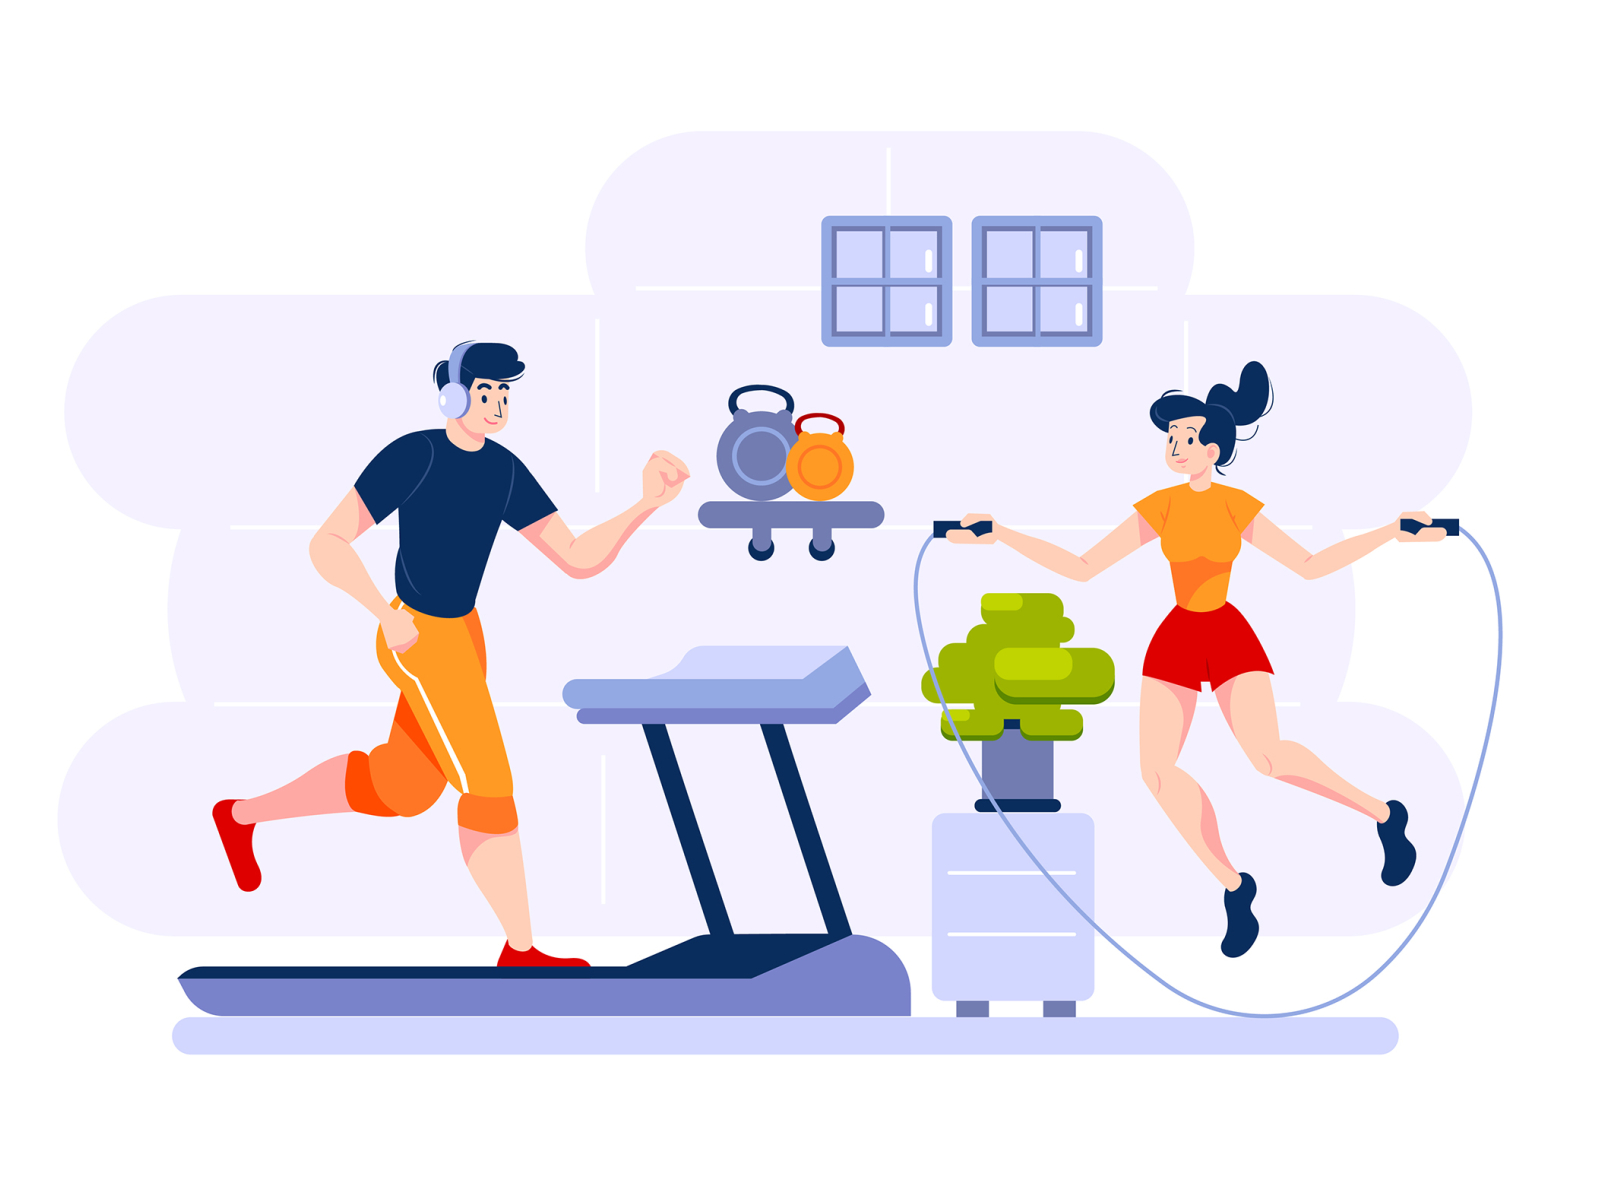 Fitness & Workout Illustration concept by HoangPts on Dribbble